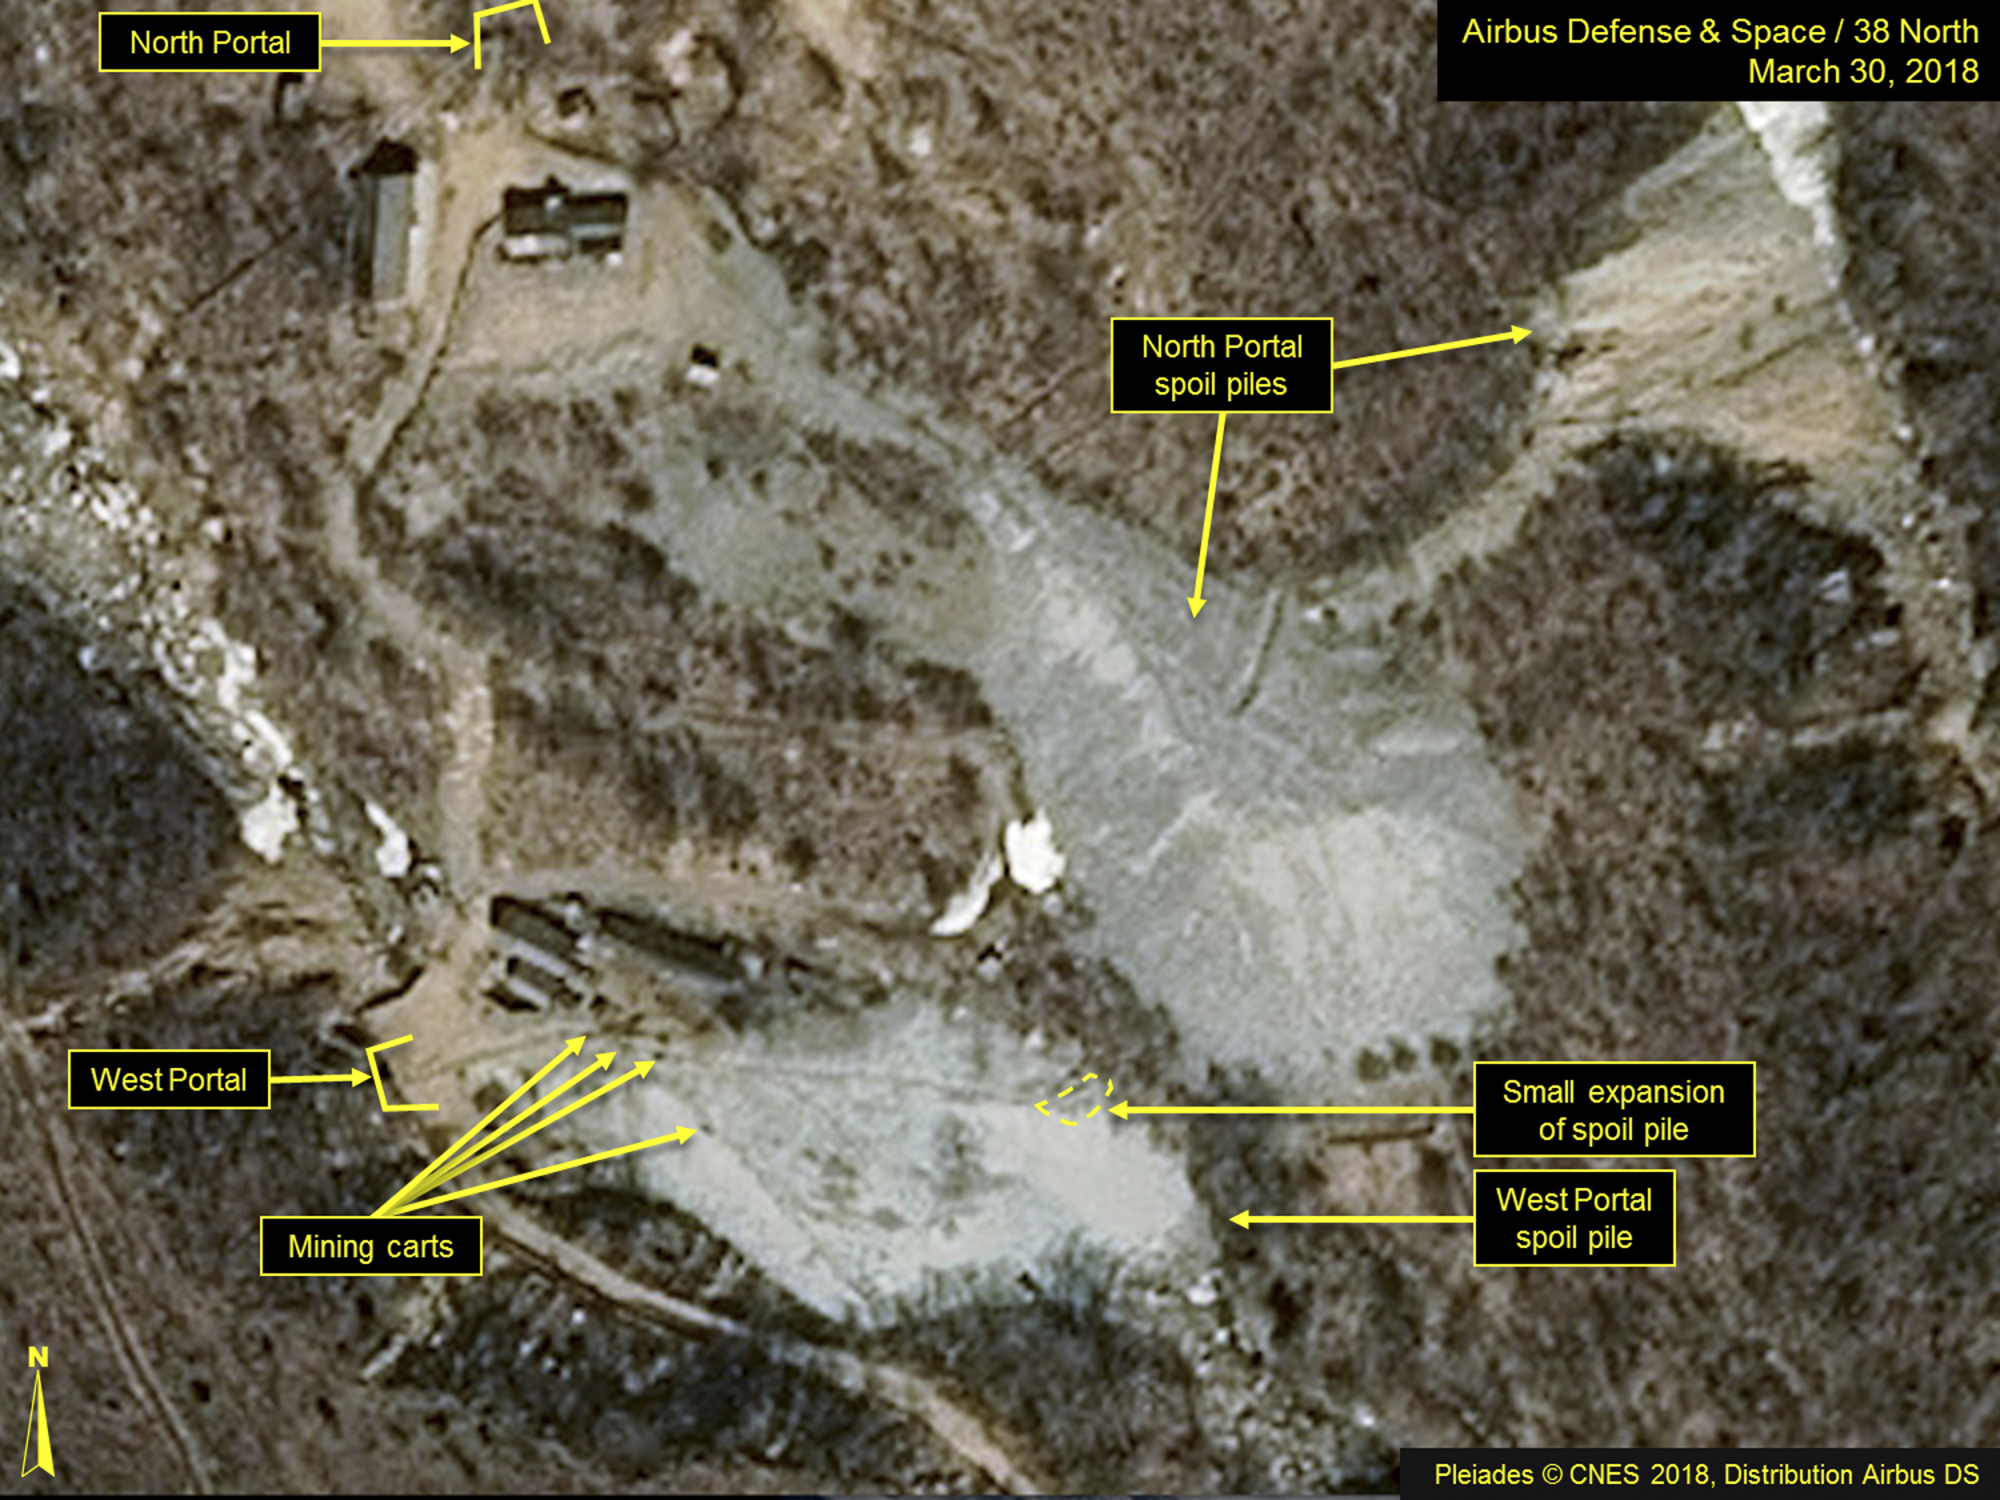 This satellite image released March 30 shows the Punggye-ri nuclear test site in North Korea. The North said Saturday that it will dismantle the site between May 23 and 25, in a dramatic event that would set up leader Kim Jong Un's summit with U.S. President Donald Trump next month. | AP